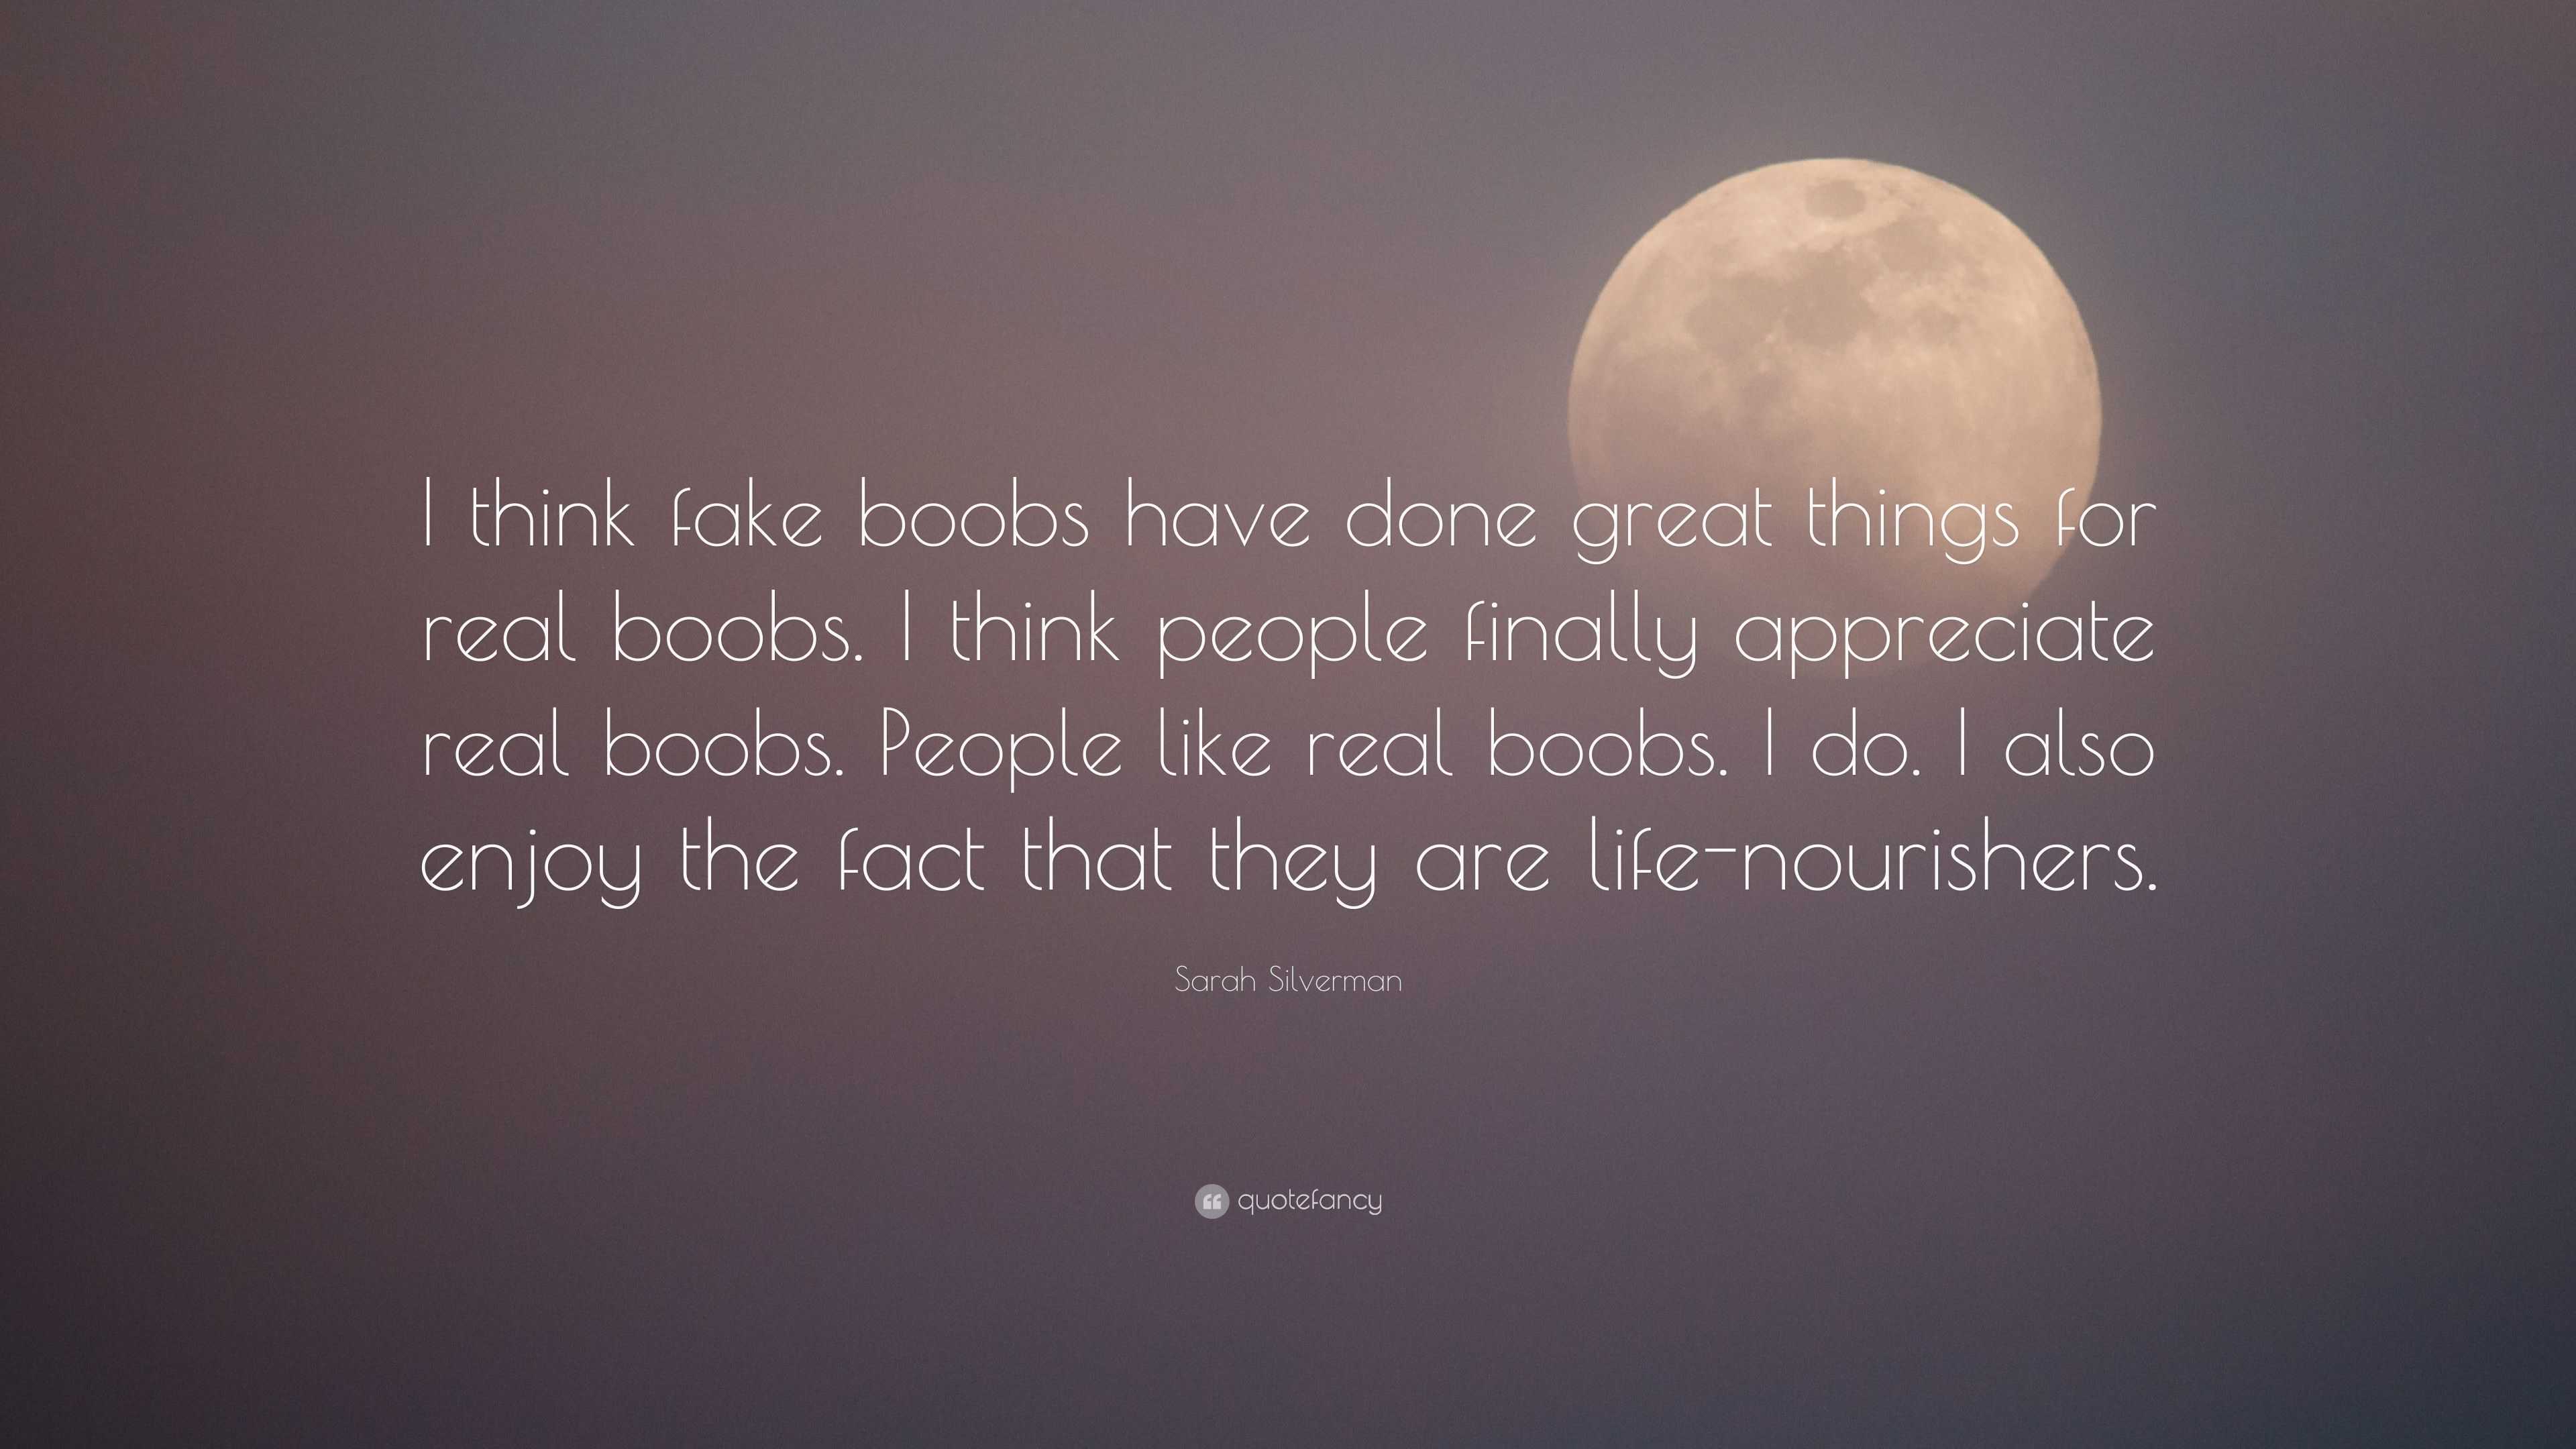 Sarah Silverman Quote: “I think fake boobs have done great things for real  boobs. I think people finally appreciate real boobs. People like real”